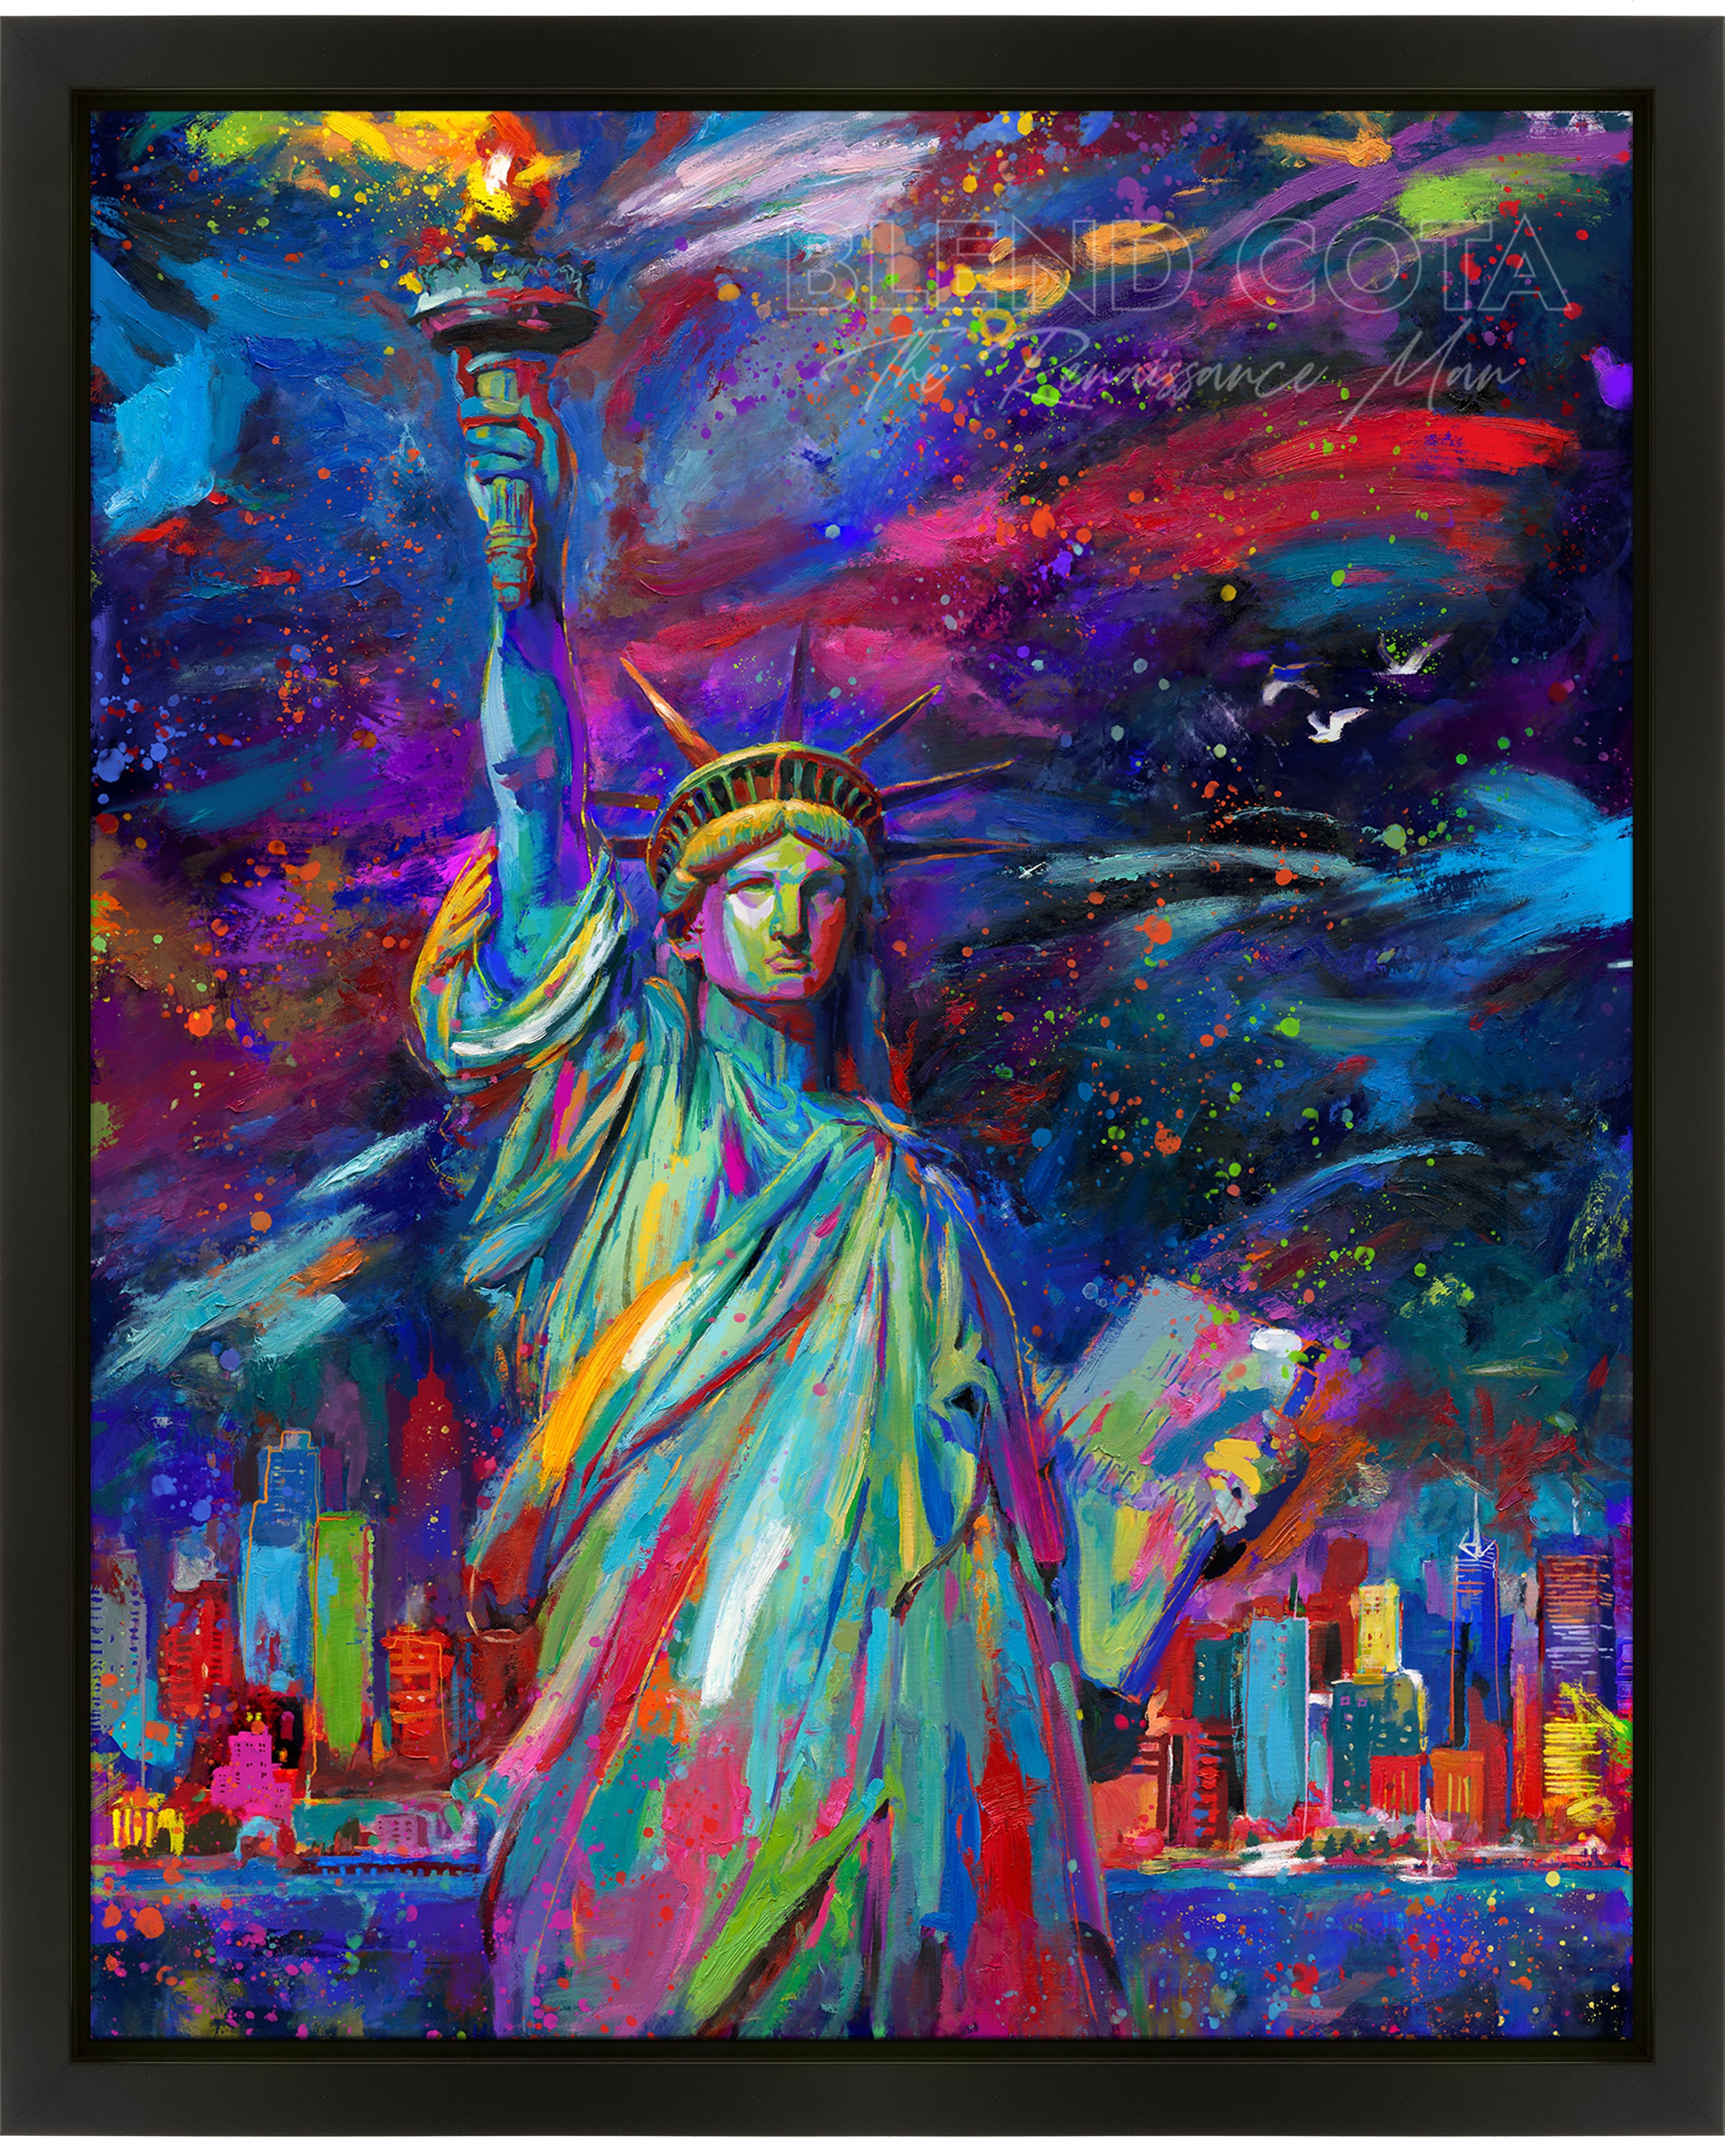 Oil on canvas original painting of the iconic Statue of Liberty in New York City, emblem and symbol of freedom and courage to make change in America and the world, shown in vibrant turquoise against a dark blue and purple sky, in colorful brushstrokes, color expressionism style.